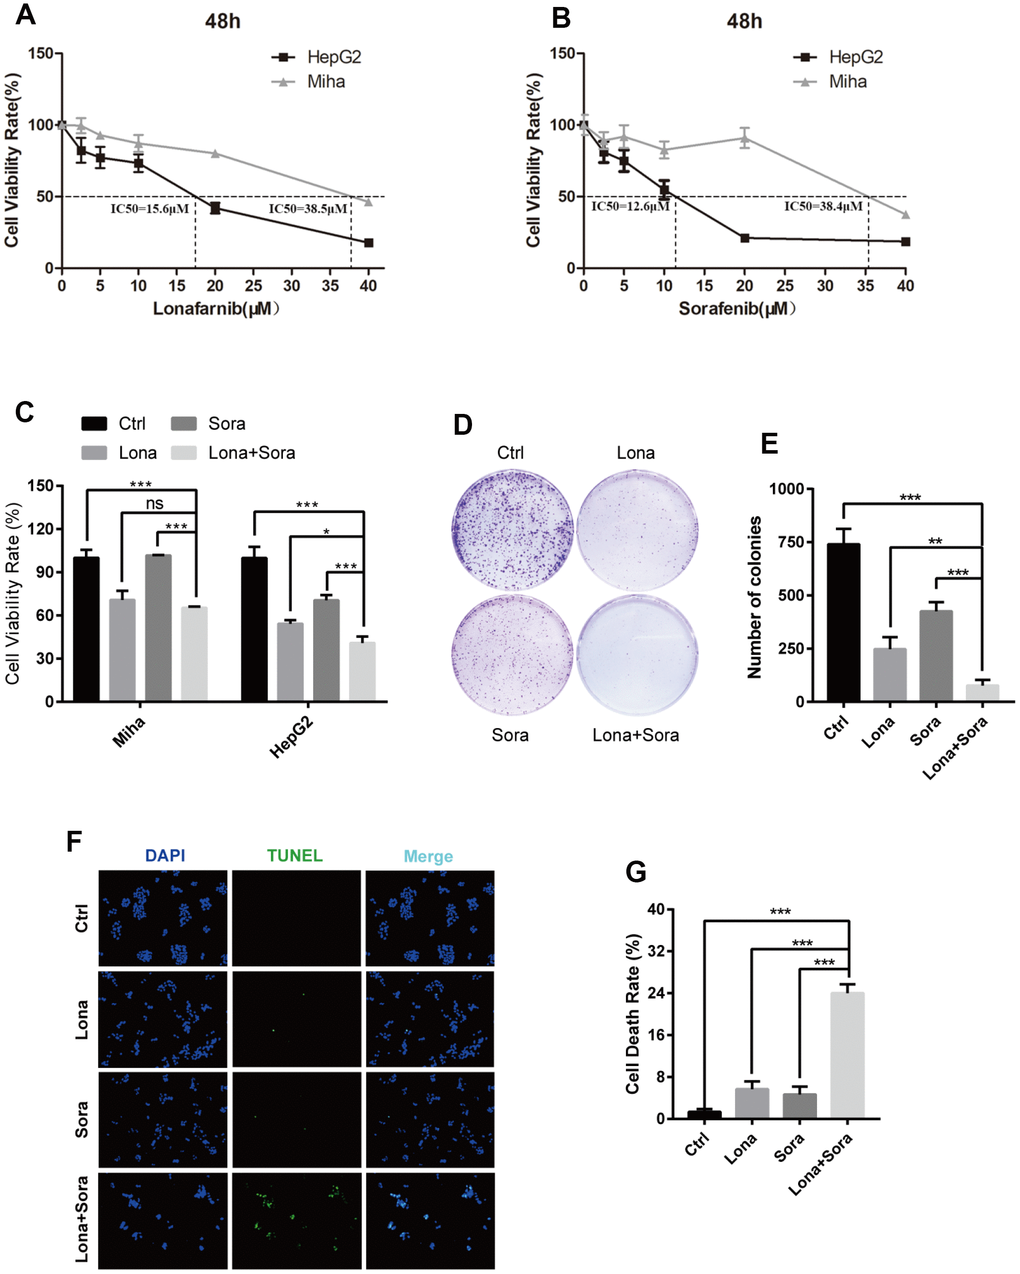 Combination treatment of lonafarnib and sorafenib inhibits HepG2 cell growth. (A and B) HepG2 and MIHA cells were subjected to CCK-8 assay with escalatory concentrations of lonafarnib or sorafenib. The IC50 value at 48 h was determined in these cell lines: HepG2 (lonafarnib: 15.6 μM, sorafenib: 12.6 μM), MIHA (lonafarnib: 38.5 μM, sorafenib: 38.4 μM). (C) Dose escalation effect of lonafarnib and sorafenib on the viability of HepG2 and MIHA cells measured at 48 h by CCK-8 assay. ns, P > 0.05; *P D) Colony formation assay in HepG2 cells. Cells were treated with lonafarnib (10 μM) and/or sorafenib (5 μM) for 14 days. At the end of this period, cells were stained with 0.5% crystal violet. (E) The number of colonies is calculated and presented as the means ± SD of triplicates. **P F) Representative image of TUNEL assay. HepG2 cells were maintained in 10 μM lonafarnib and/or 5 μM sorafenib for 48 h. The green puncta indicate the broken DNA fragment in cells. (G) The number of TUNEL-labeled DNA fragments were presented as the means ± SD of triplicates. ***P 